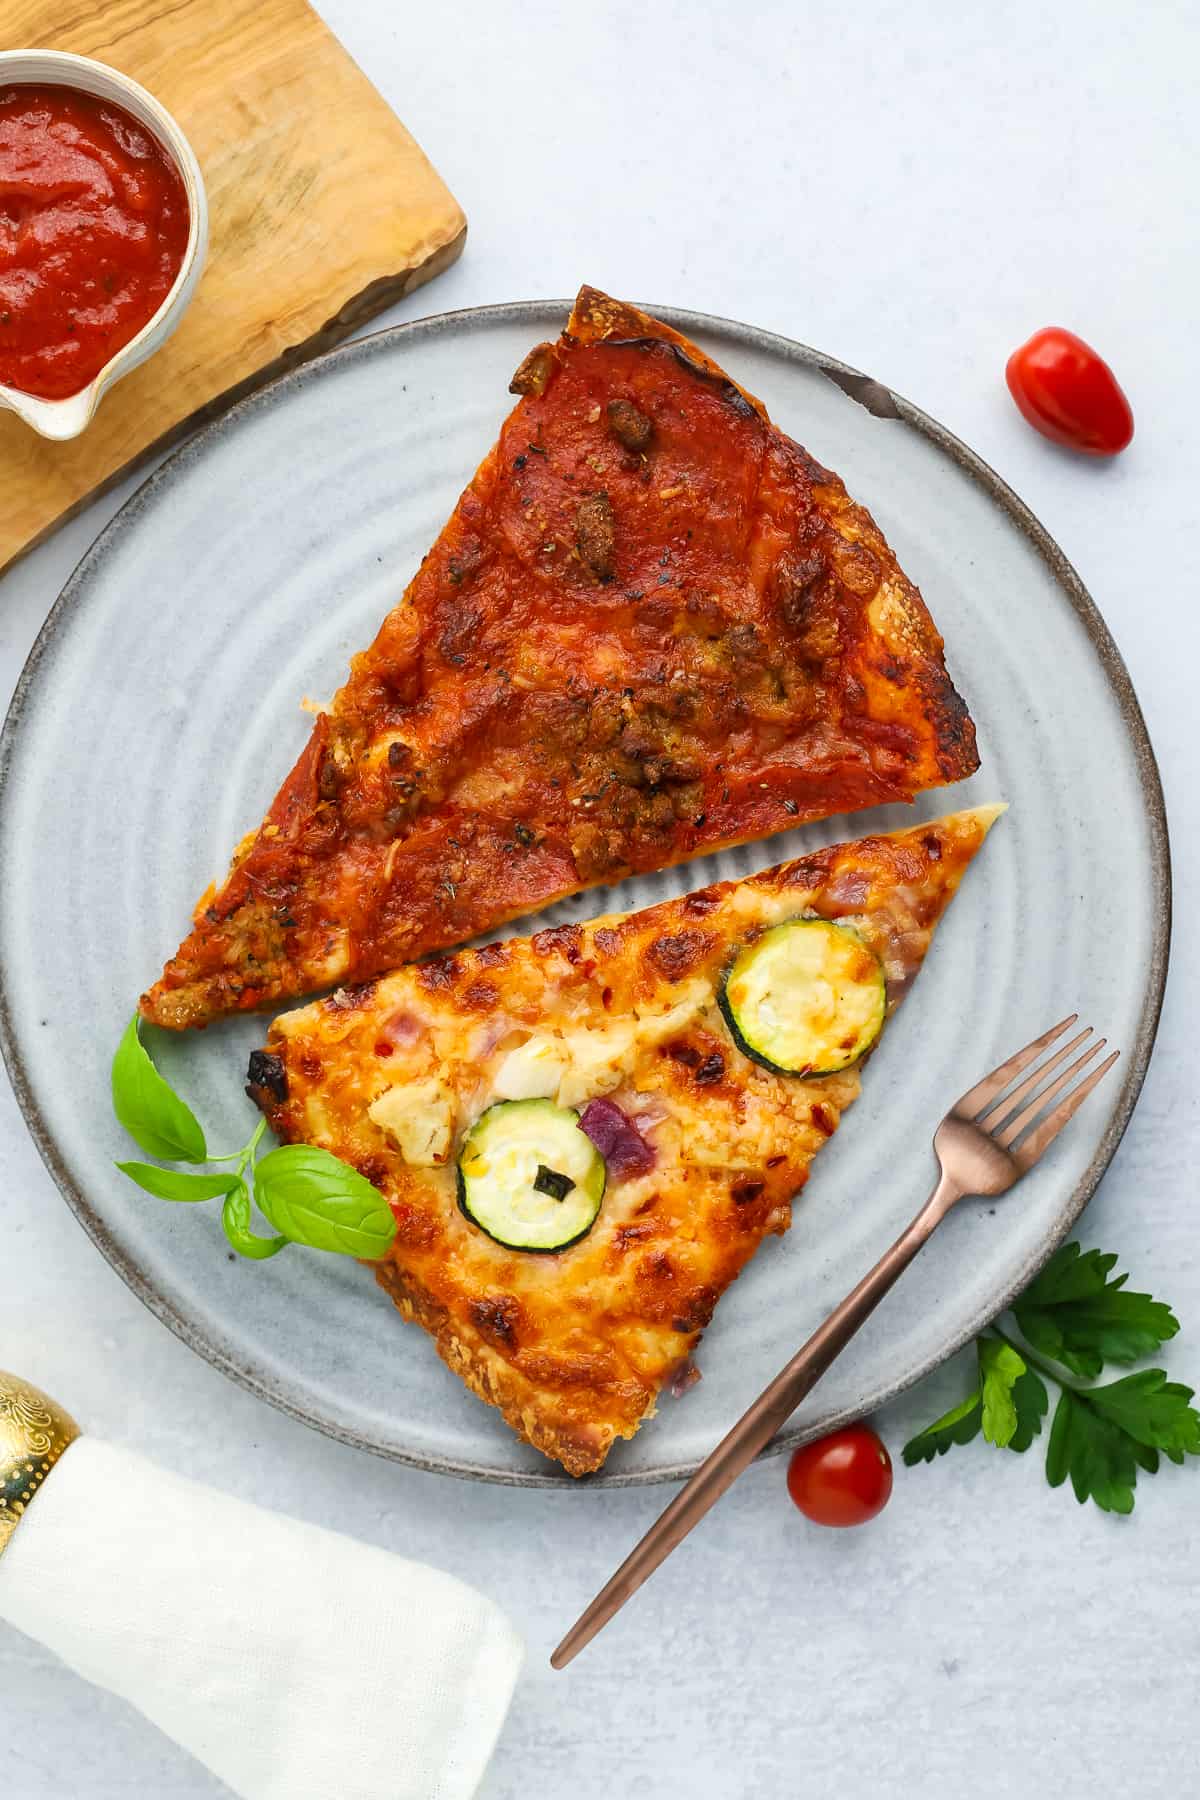 2 slices of pizza on a grey plate with a bronze fork.